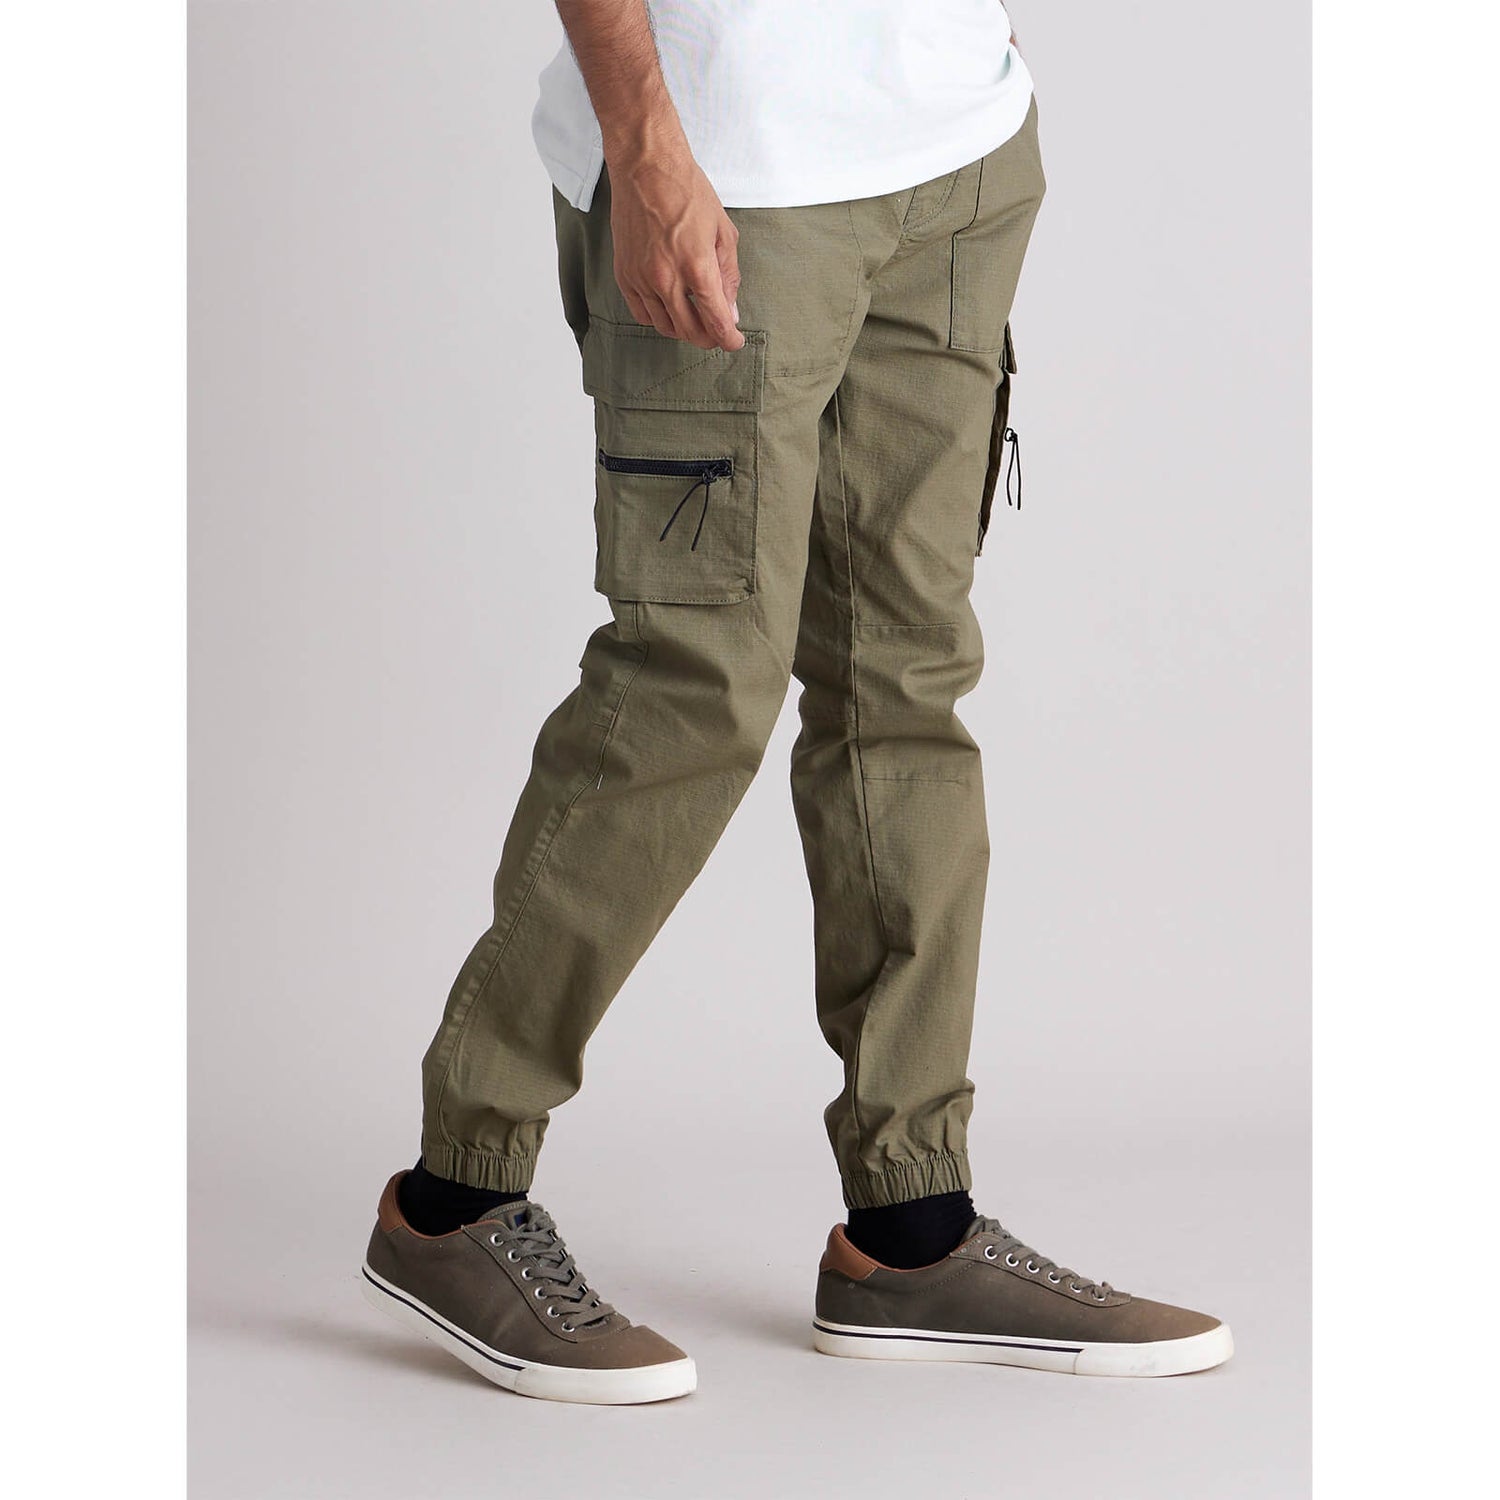 LIMITED COLLECTION Plus Size Khaki Green Cargo Wide Leg Trousers  Yours  Clothing